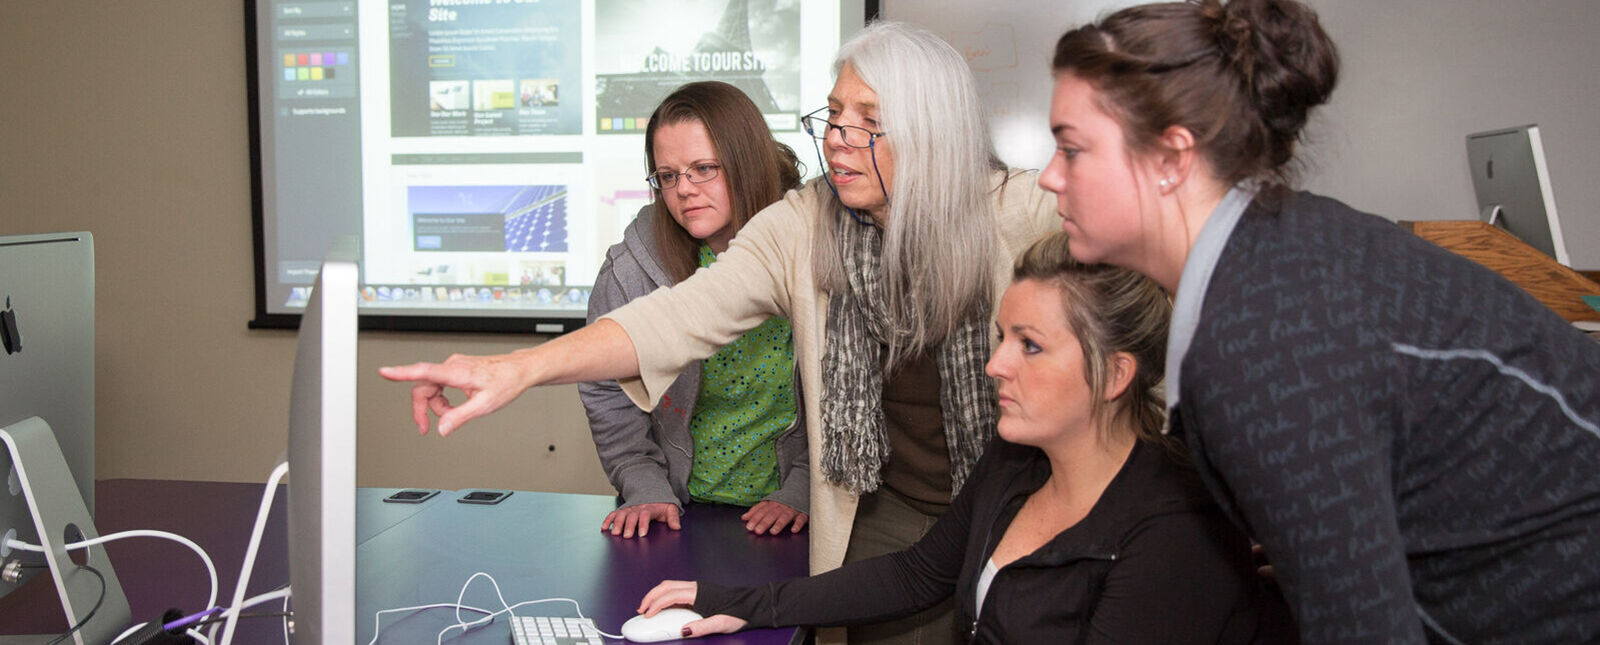 A faculty member helps three female students at a computer